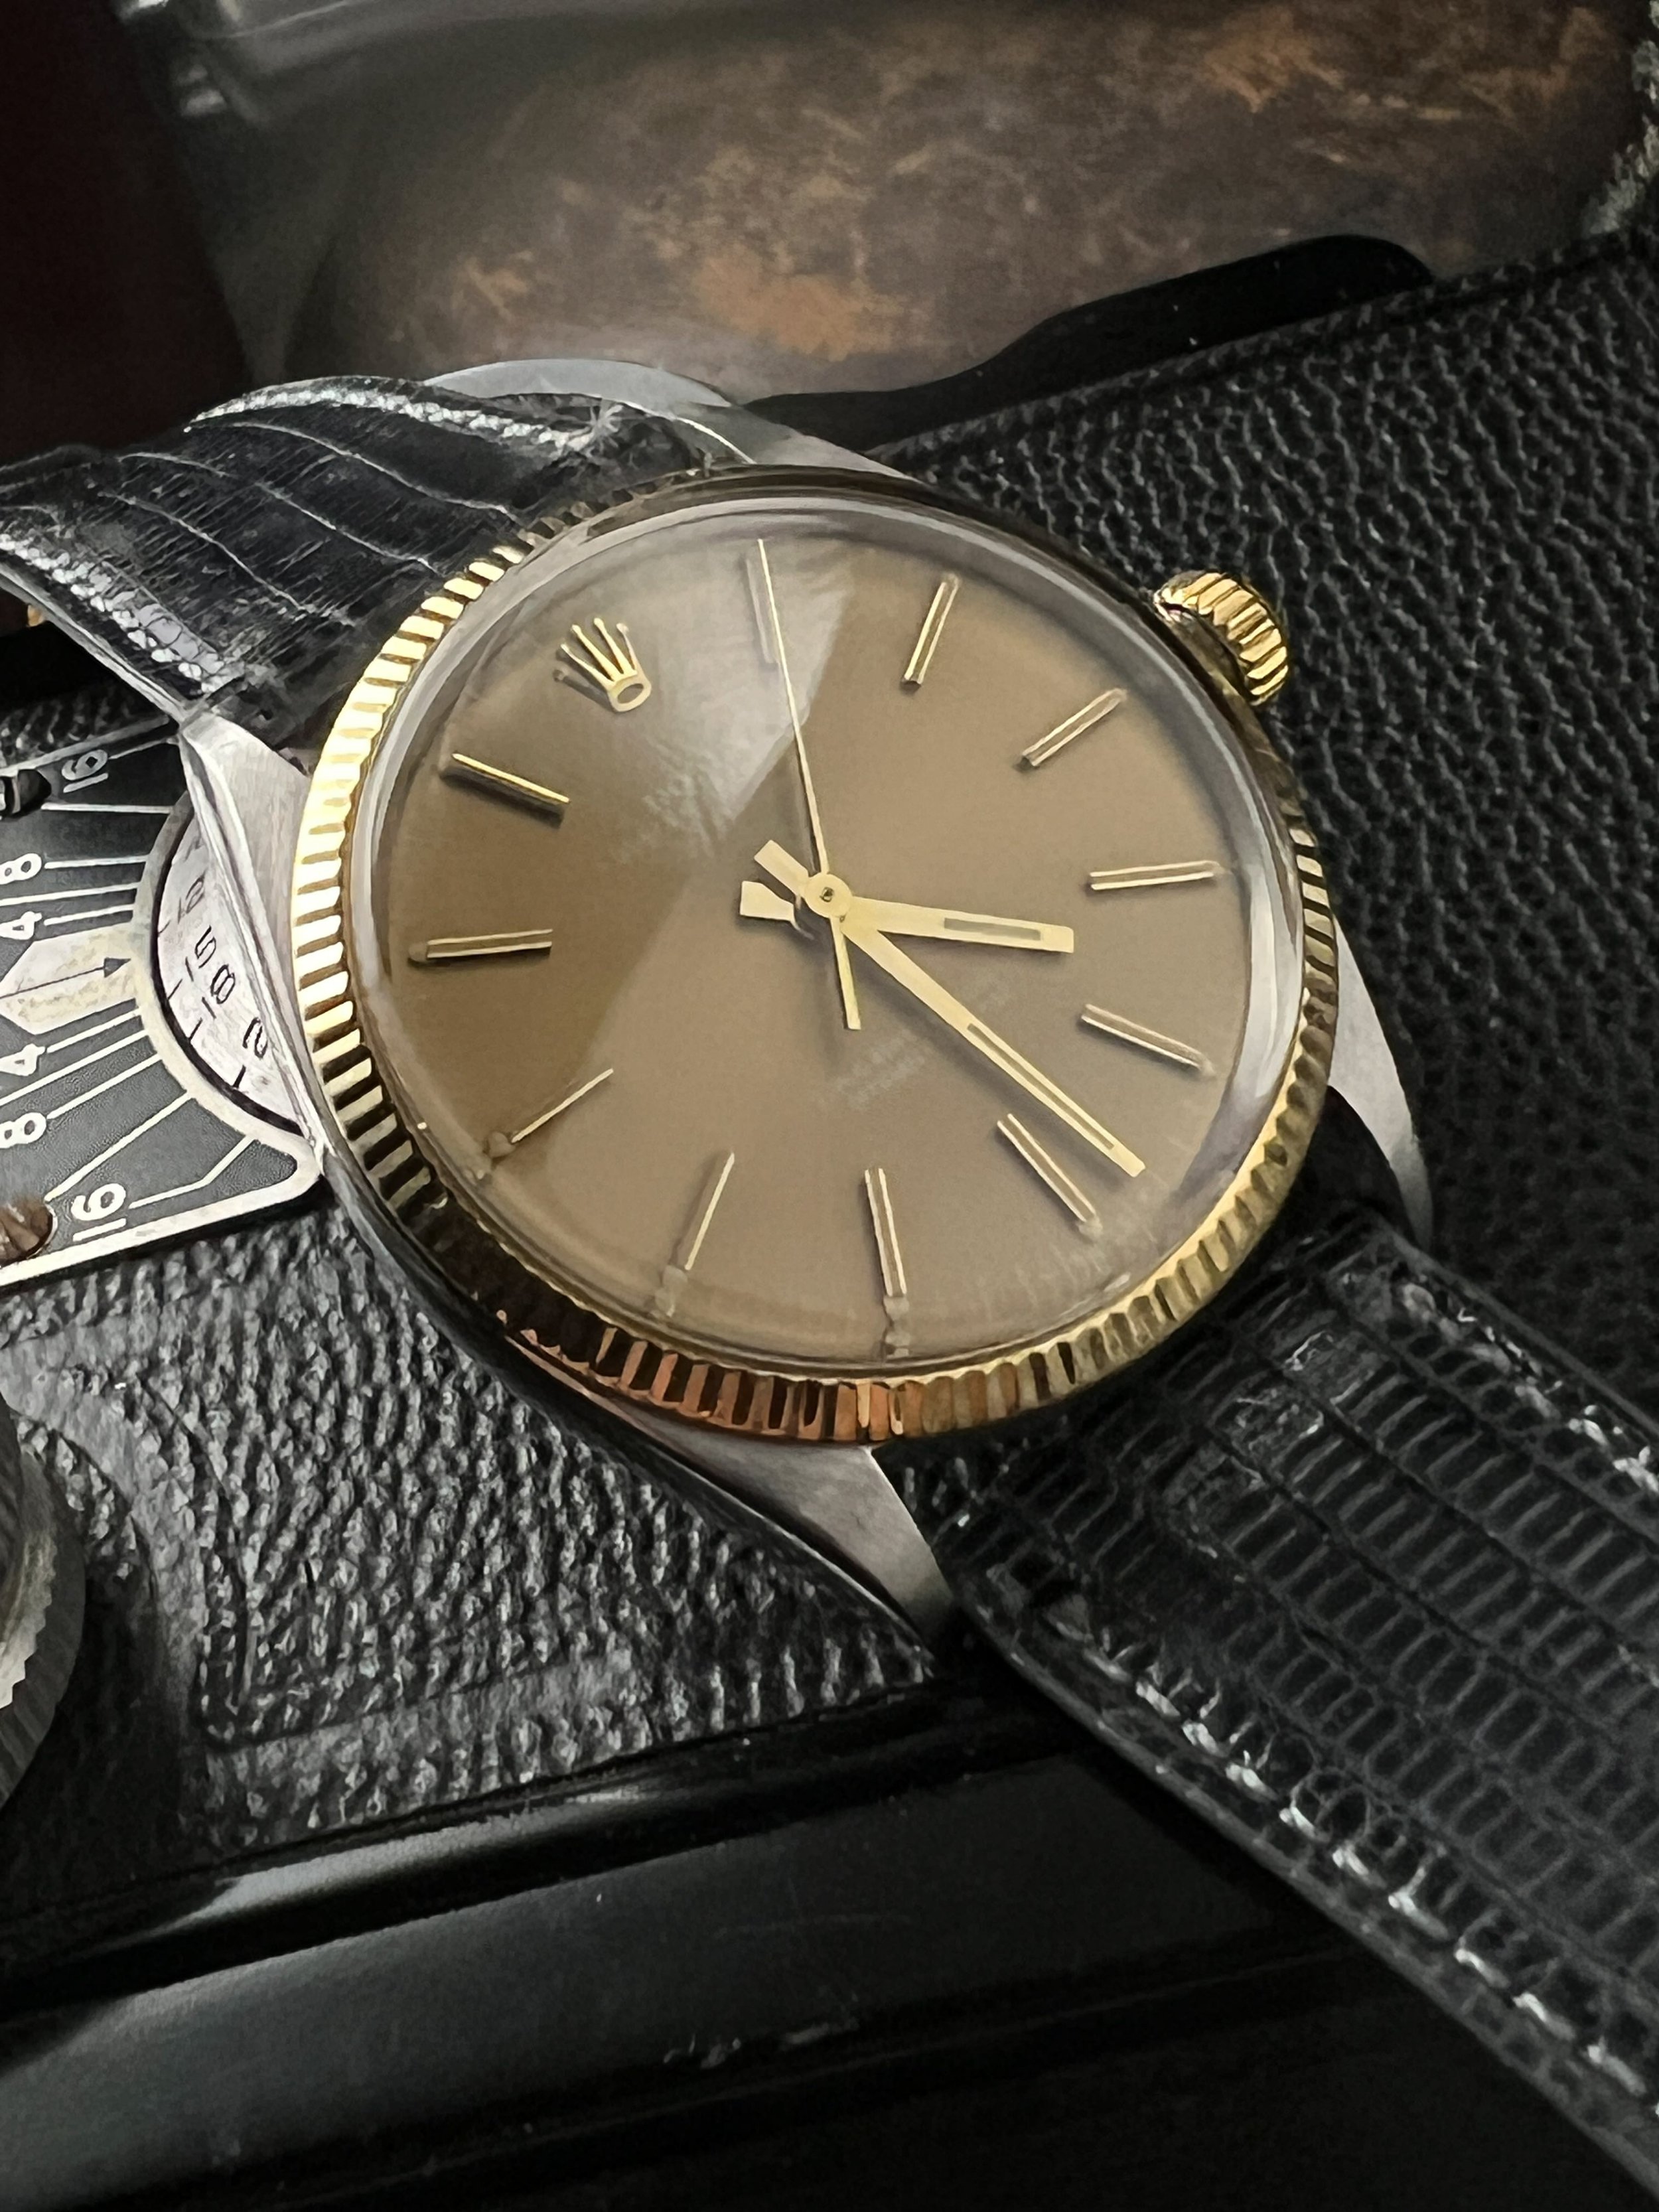 1970 Rolex Oyster Perpetual 2 Tone — Cool Vintage Watches